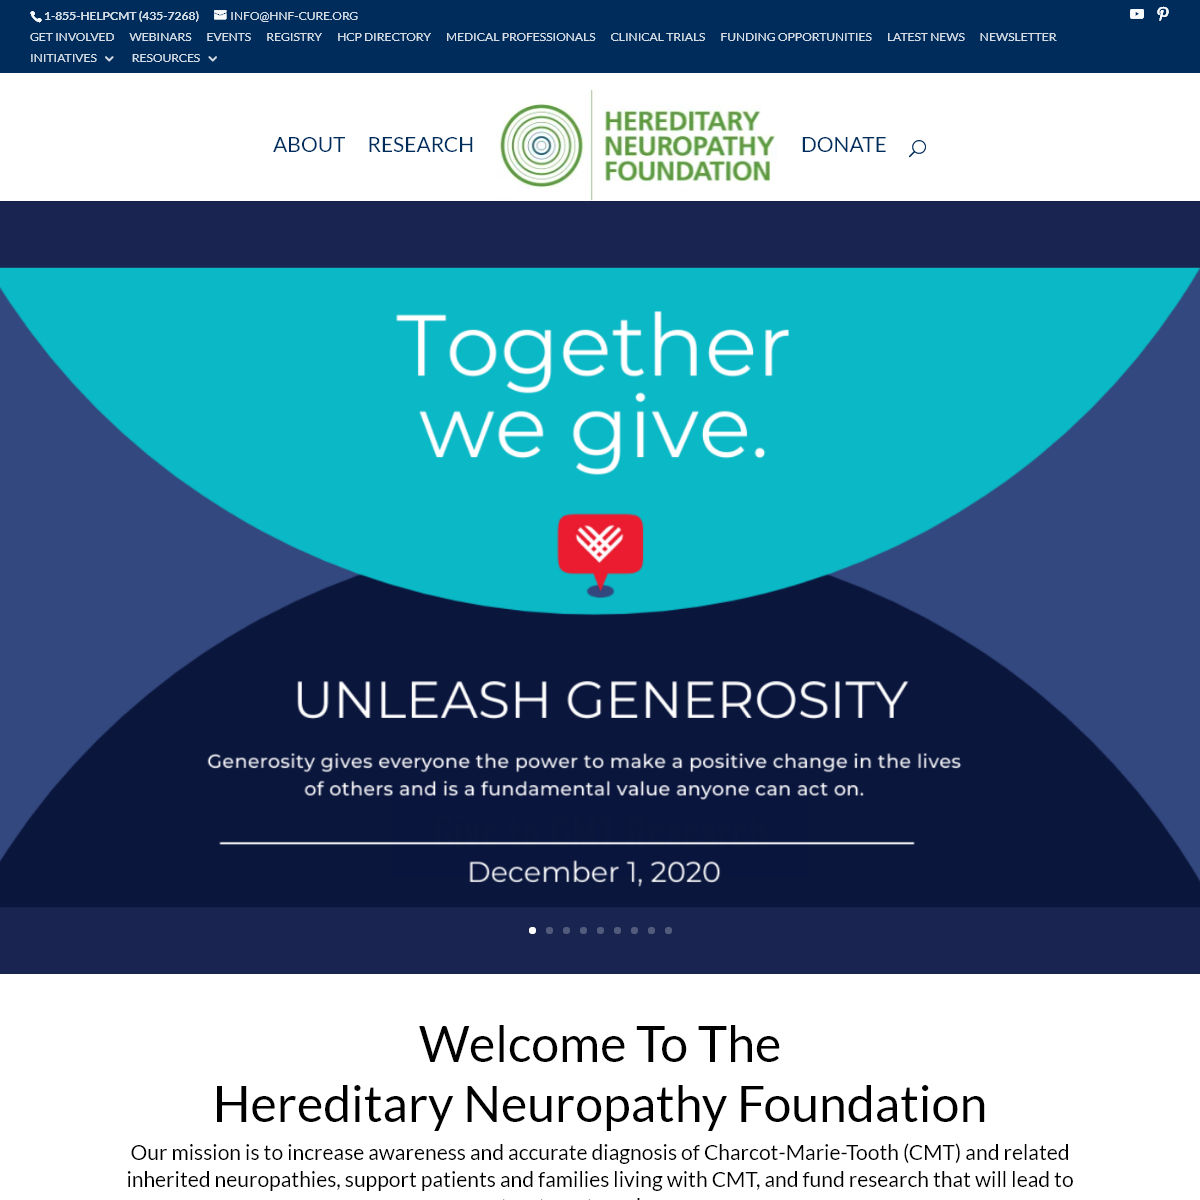 A complete backup of hnf-cure.org